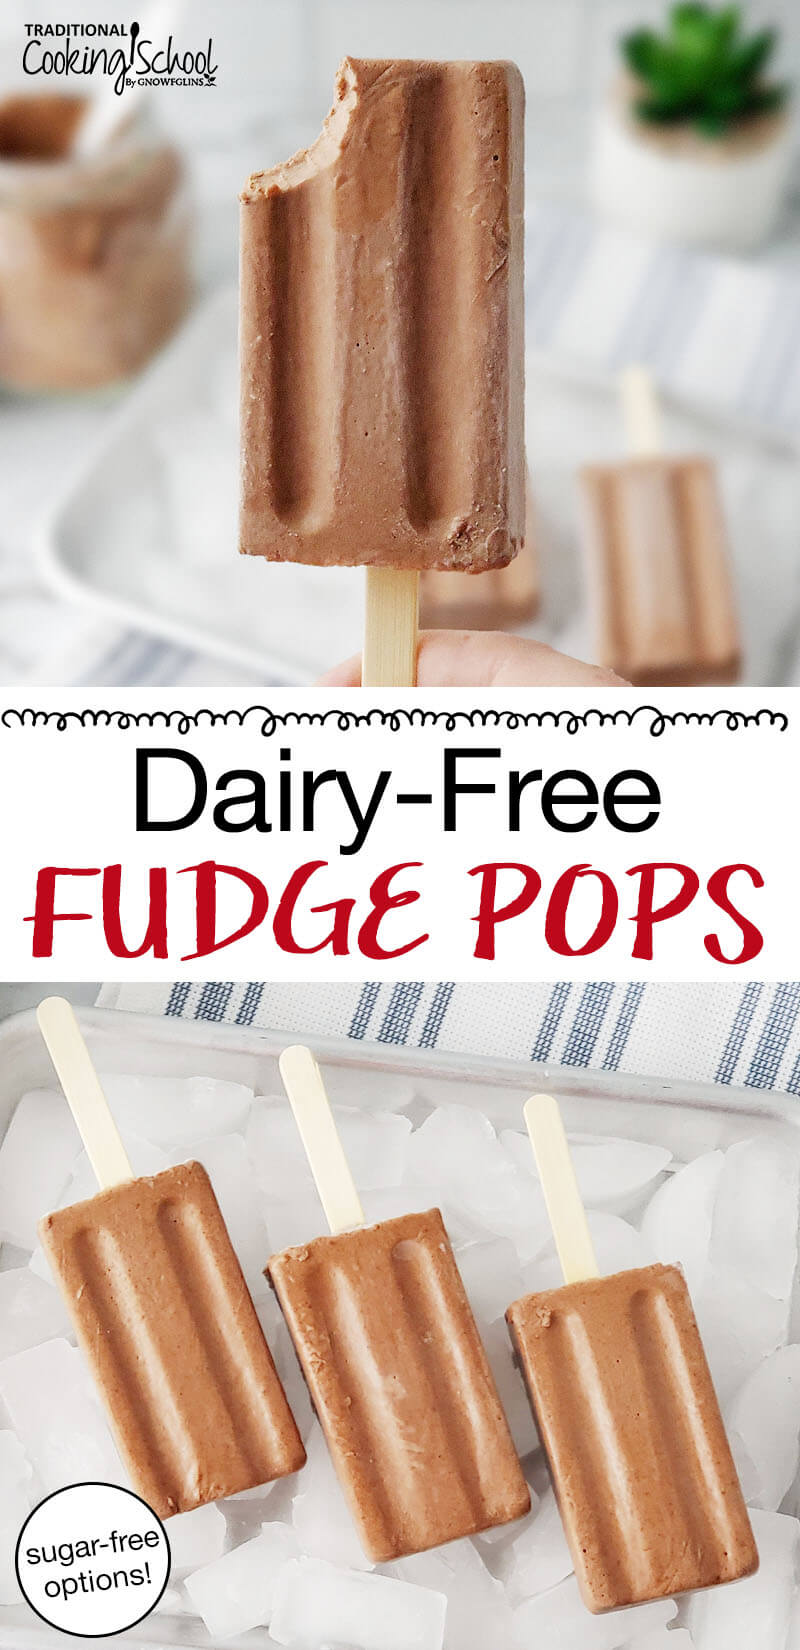 photo collage of chocolate popsicles with text overlay: "Dairy-Free Fudge Pops (sugar-free options!)"